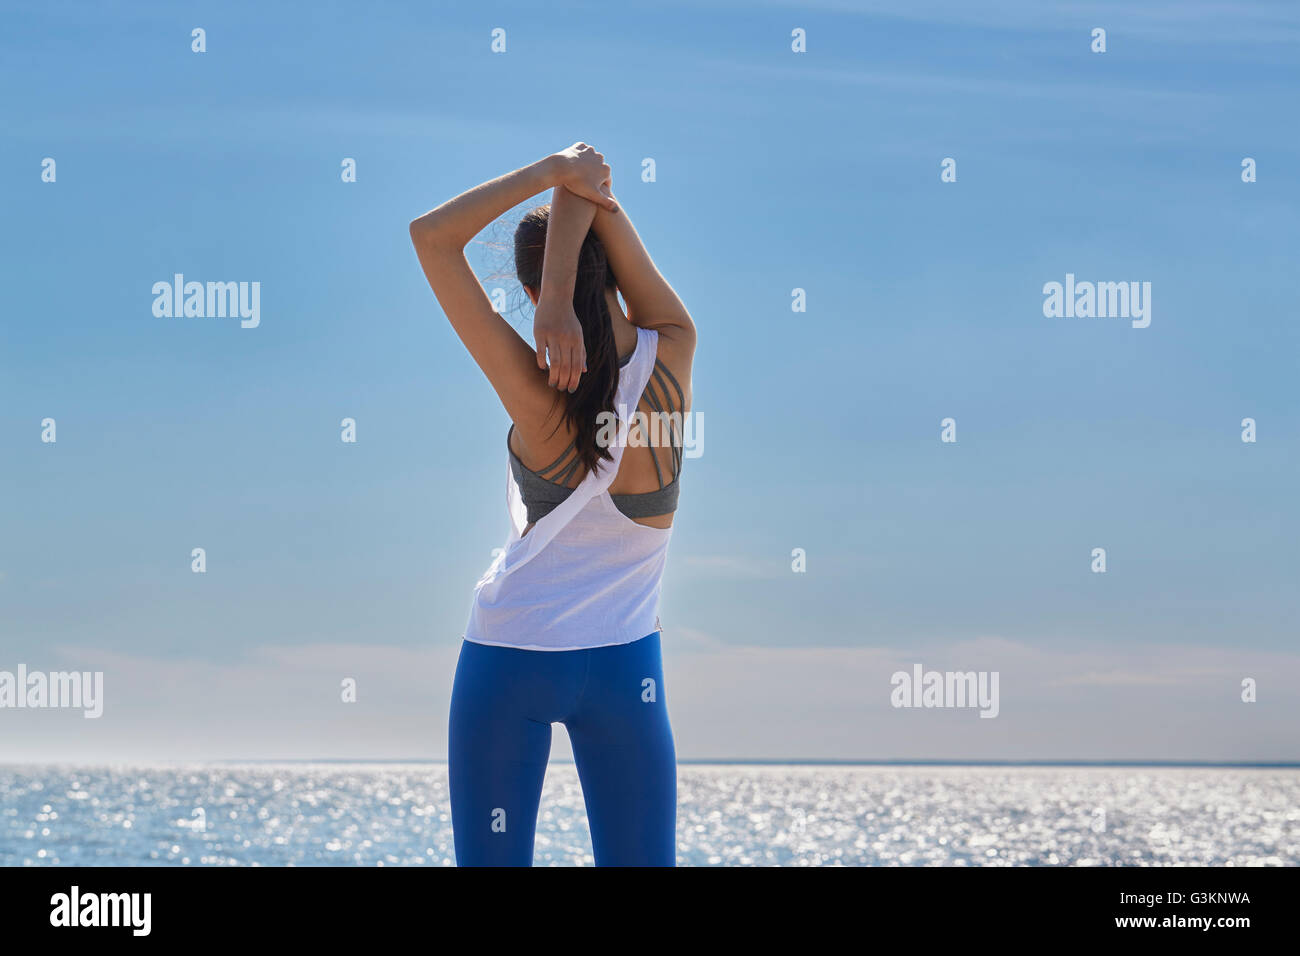 Rear view of young woman arms raised hands behind head stretching Stock Photo